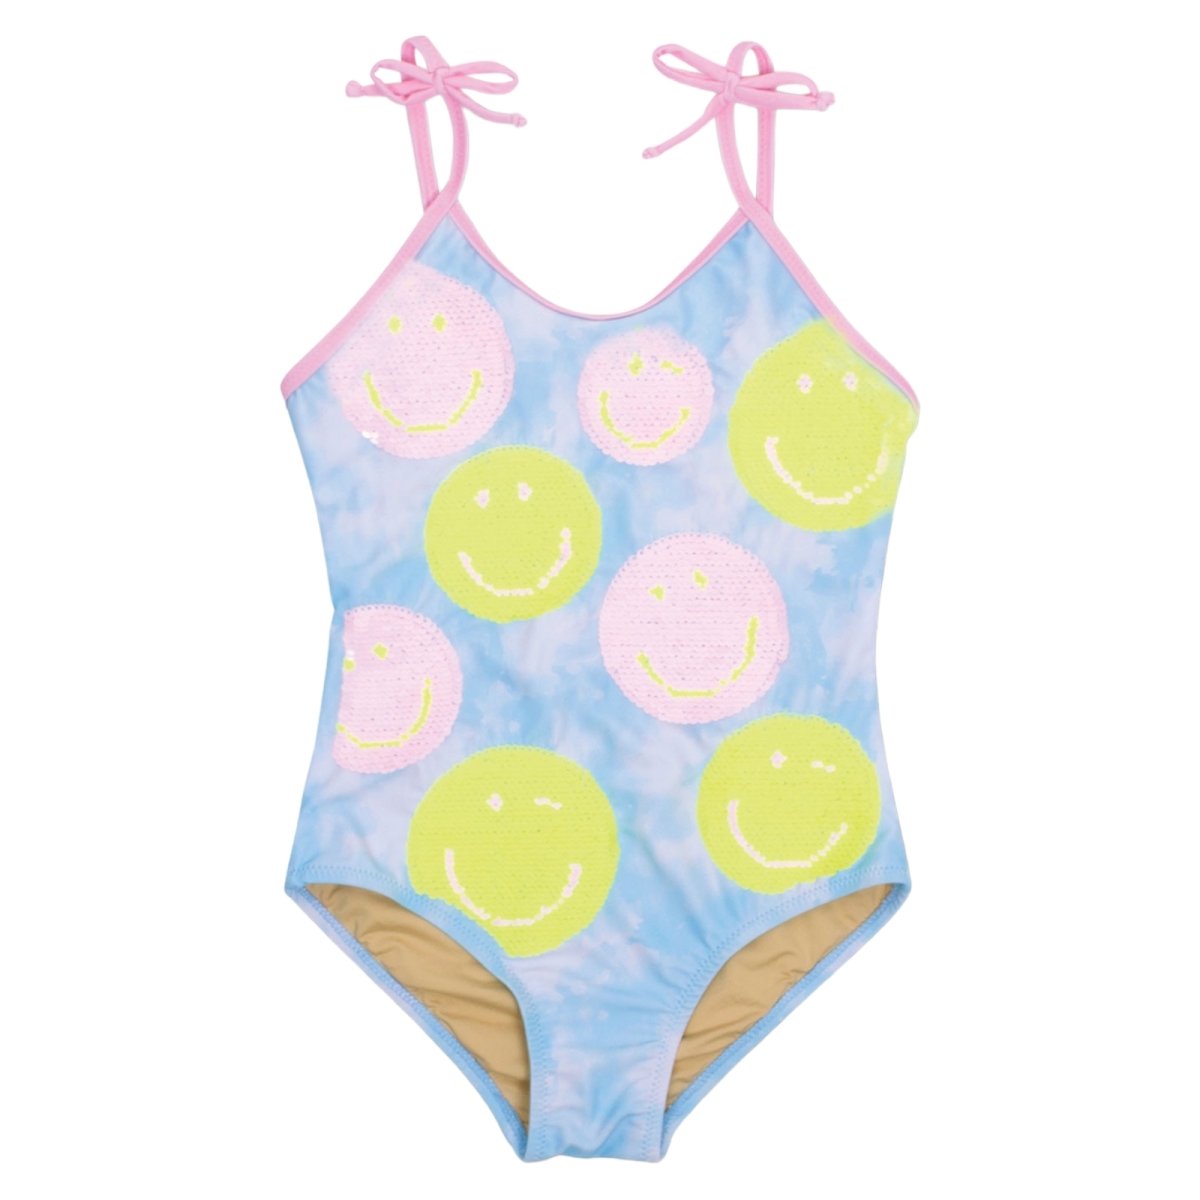 SMILEY FACE SEQUIN TIE DYE ONE PIECE SWIMSUIT - ONE PIECE SWIMSUIT